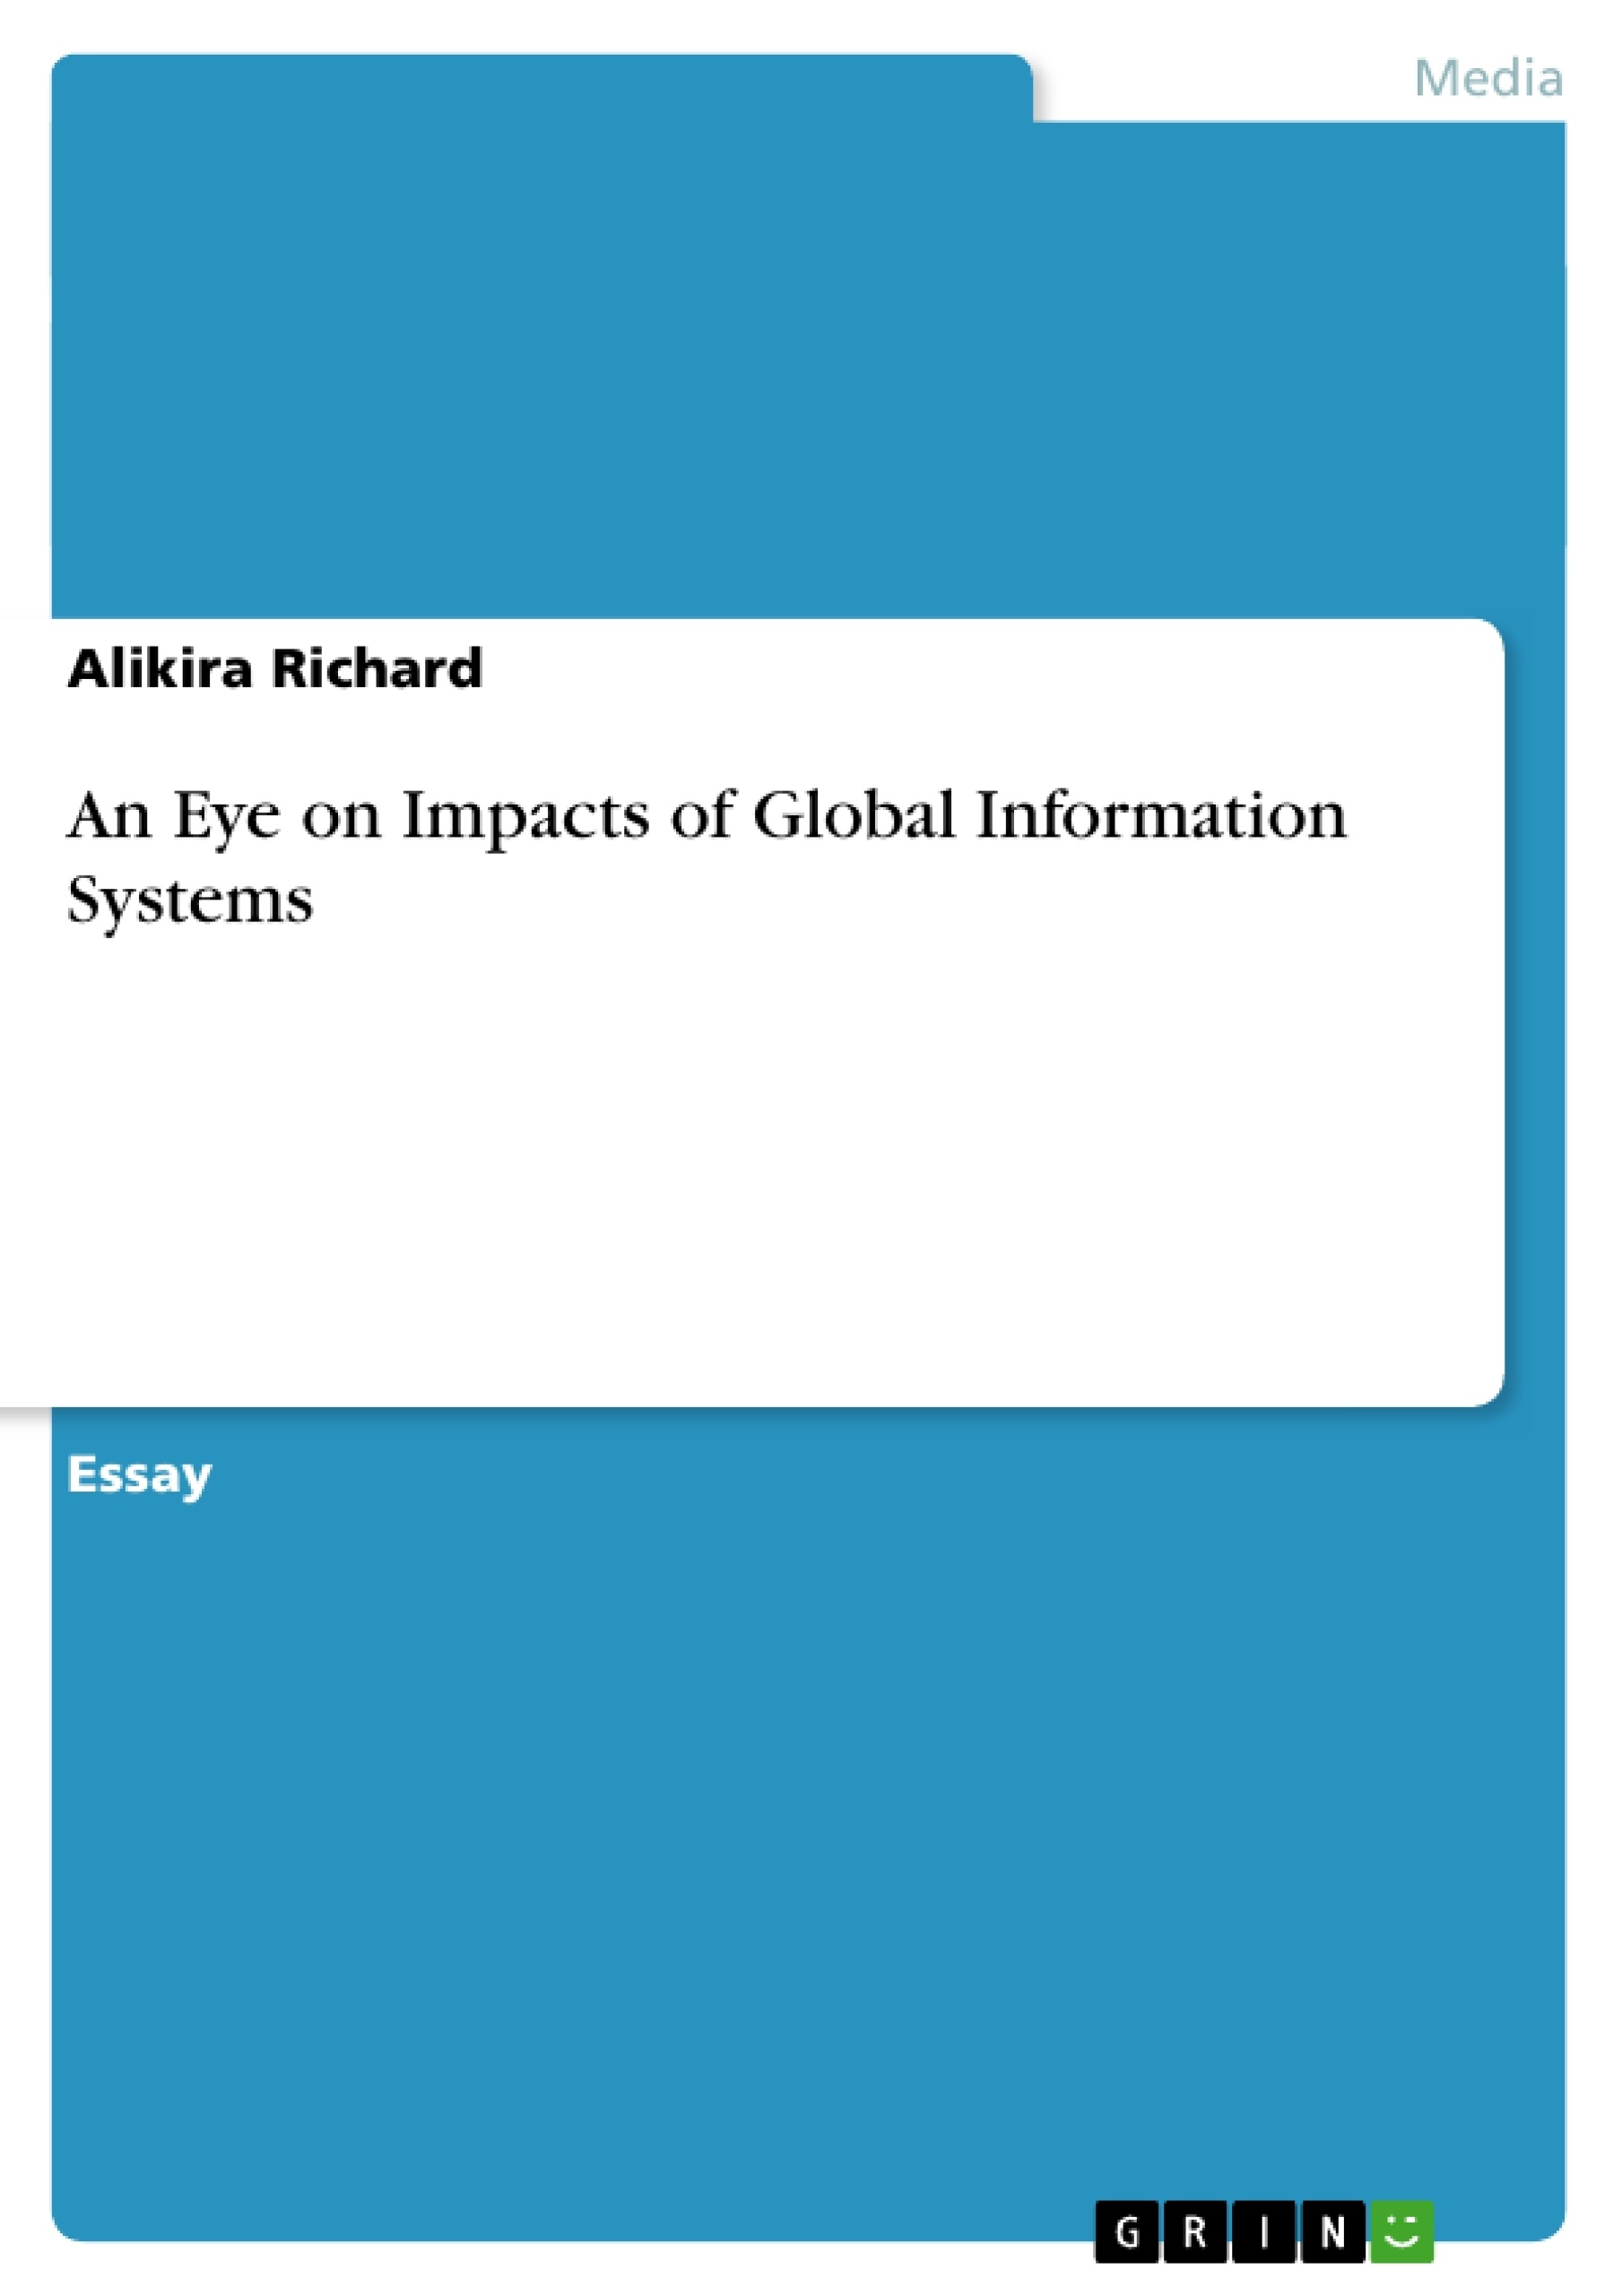 Título: An Eye on Impacts of Global Information Systems